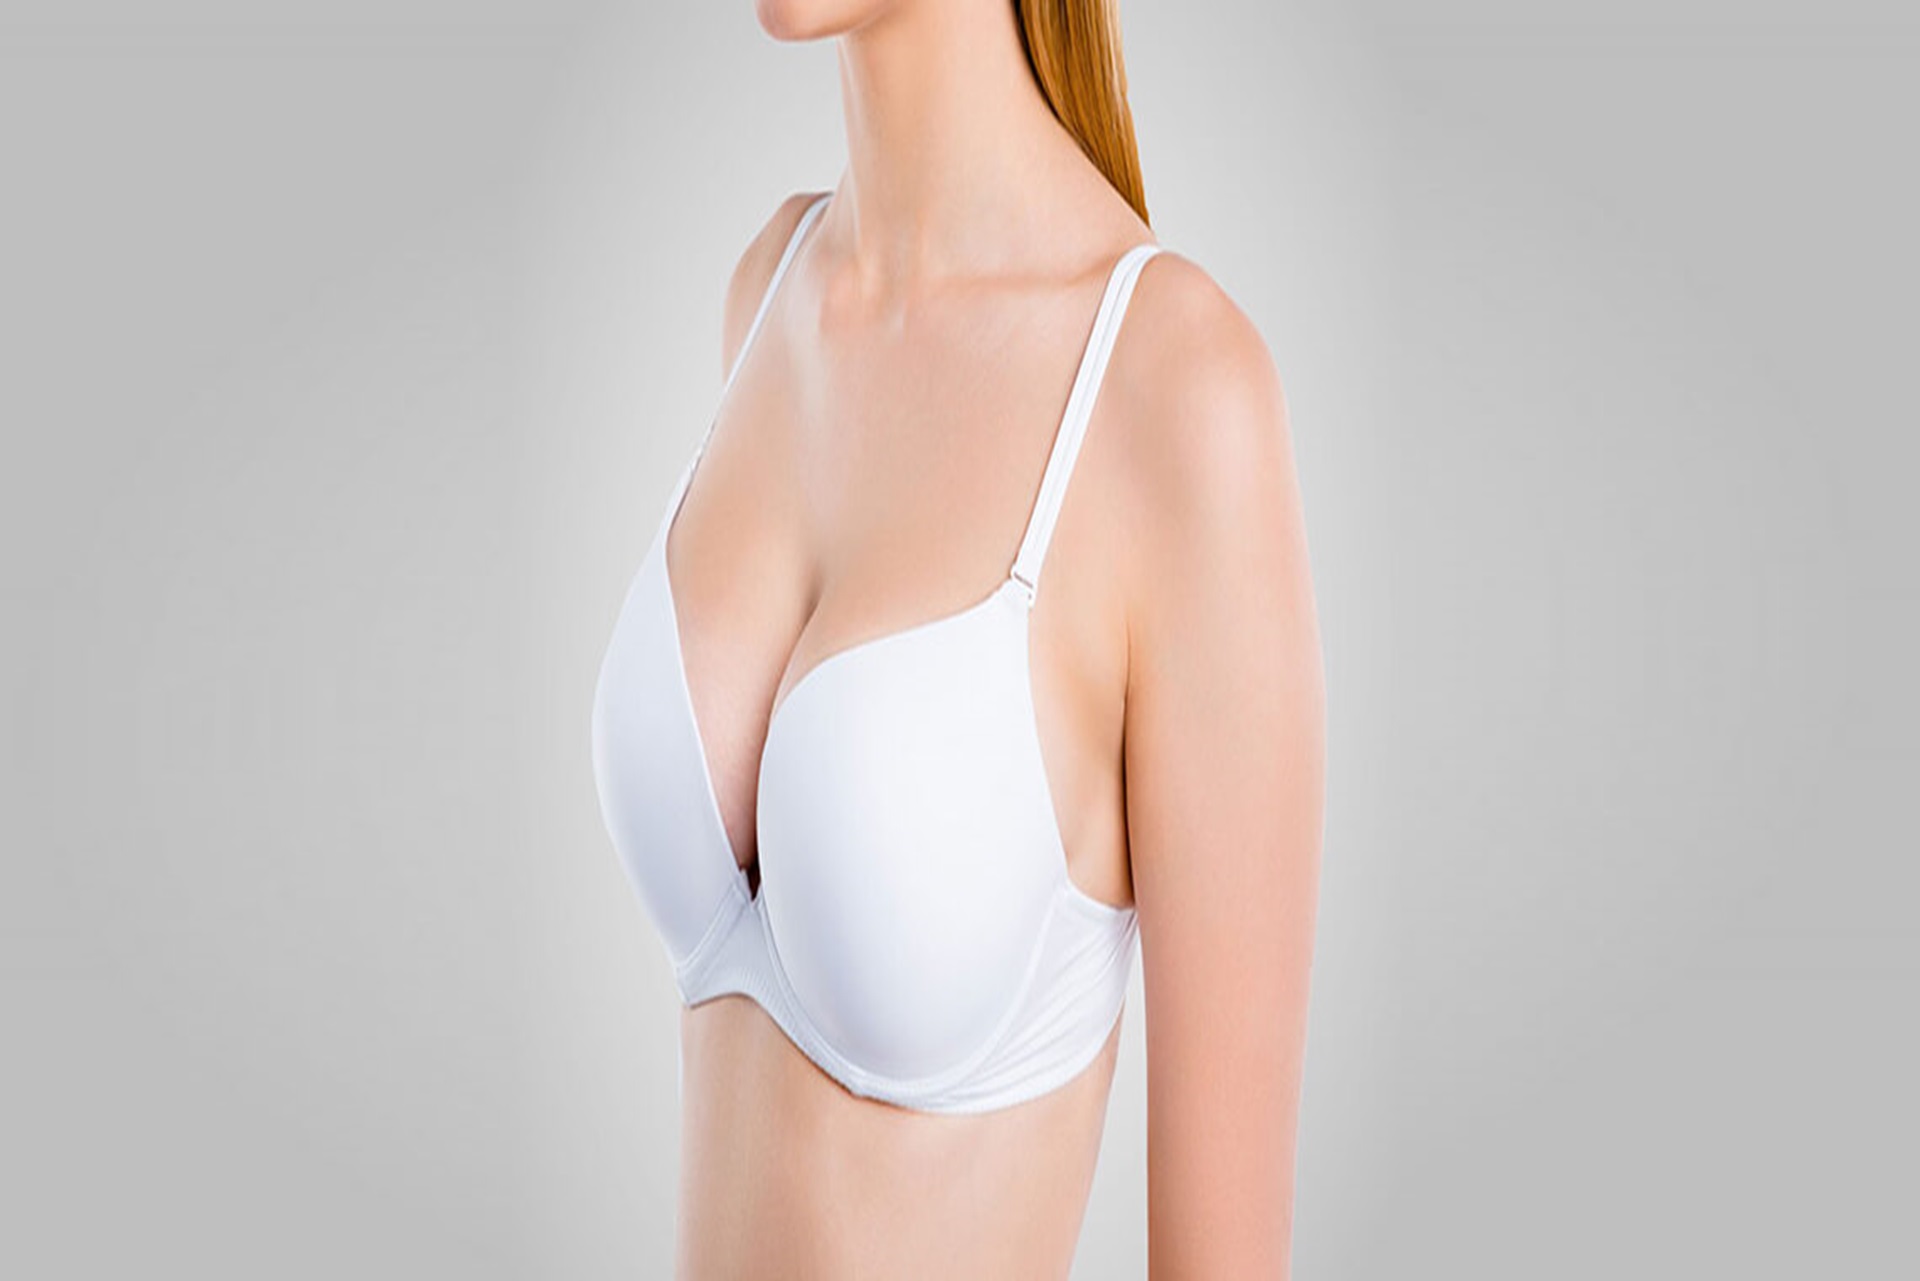 Complications of Breast Augmentation in aberdeen, Uk by Dr Jamil Ahmed